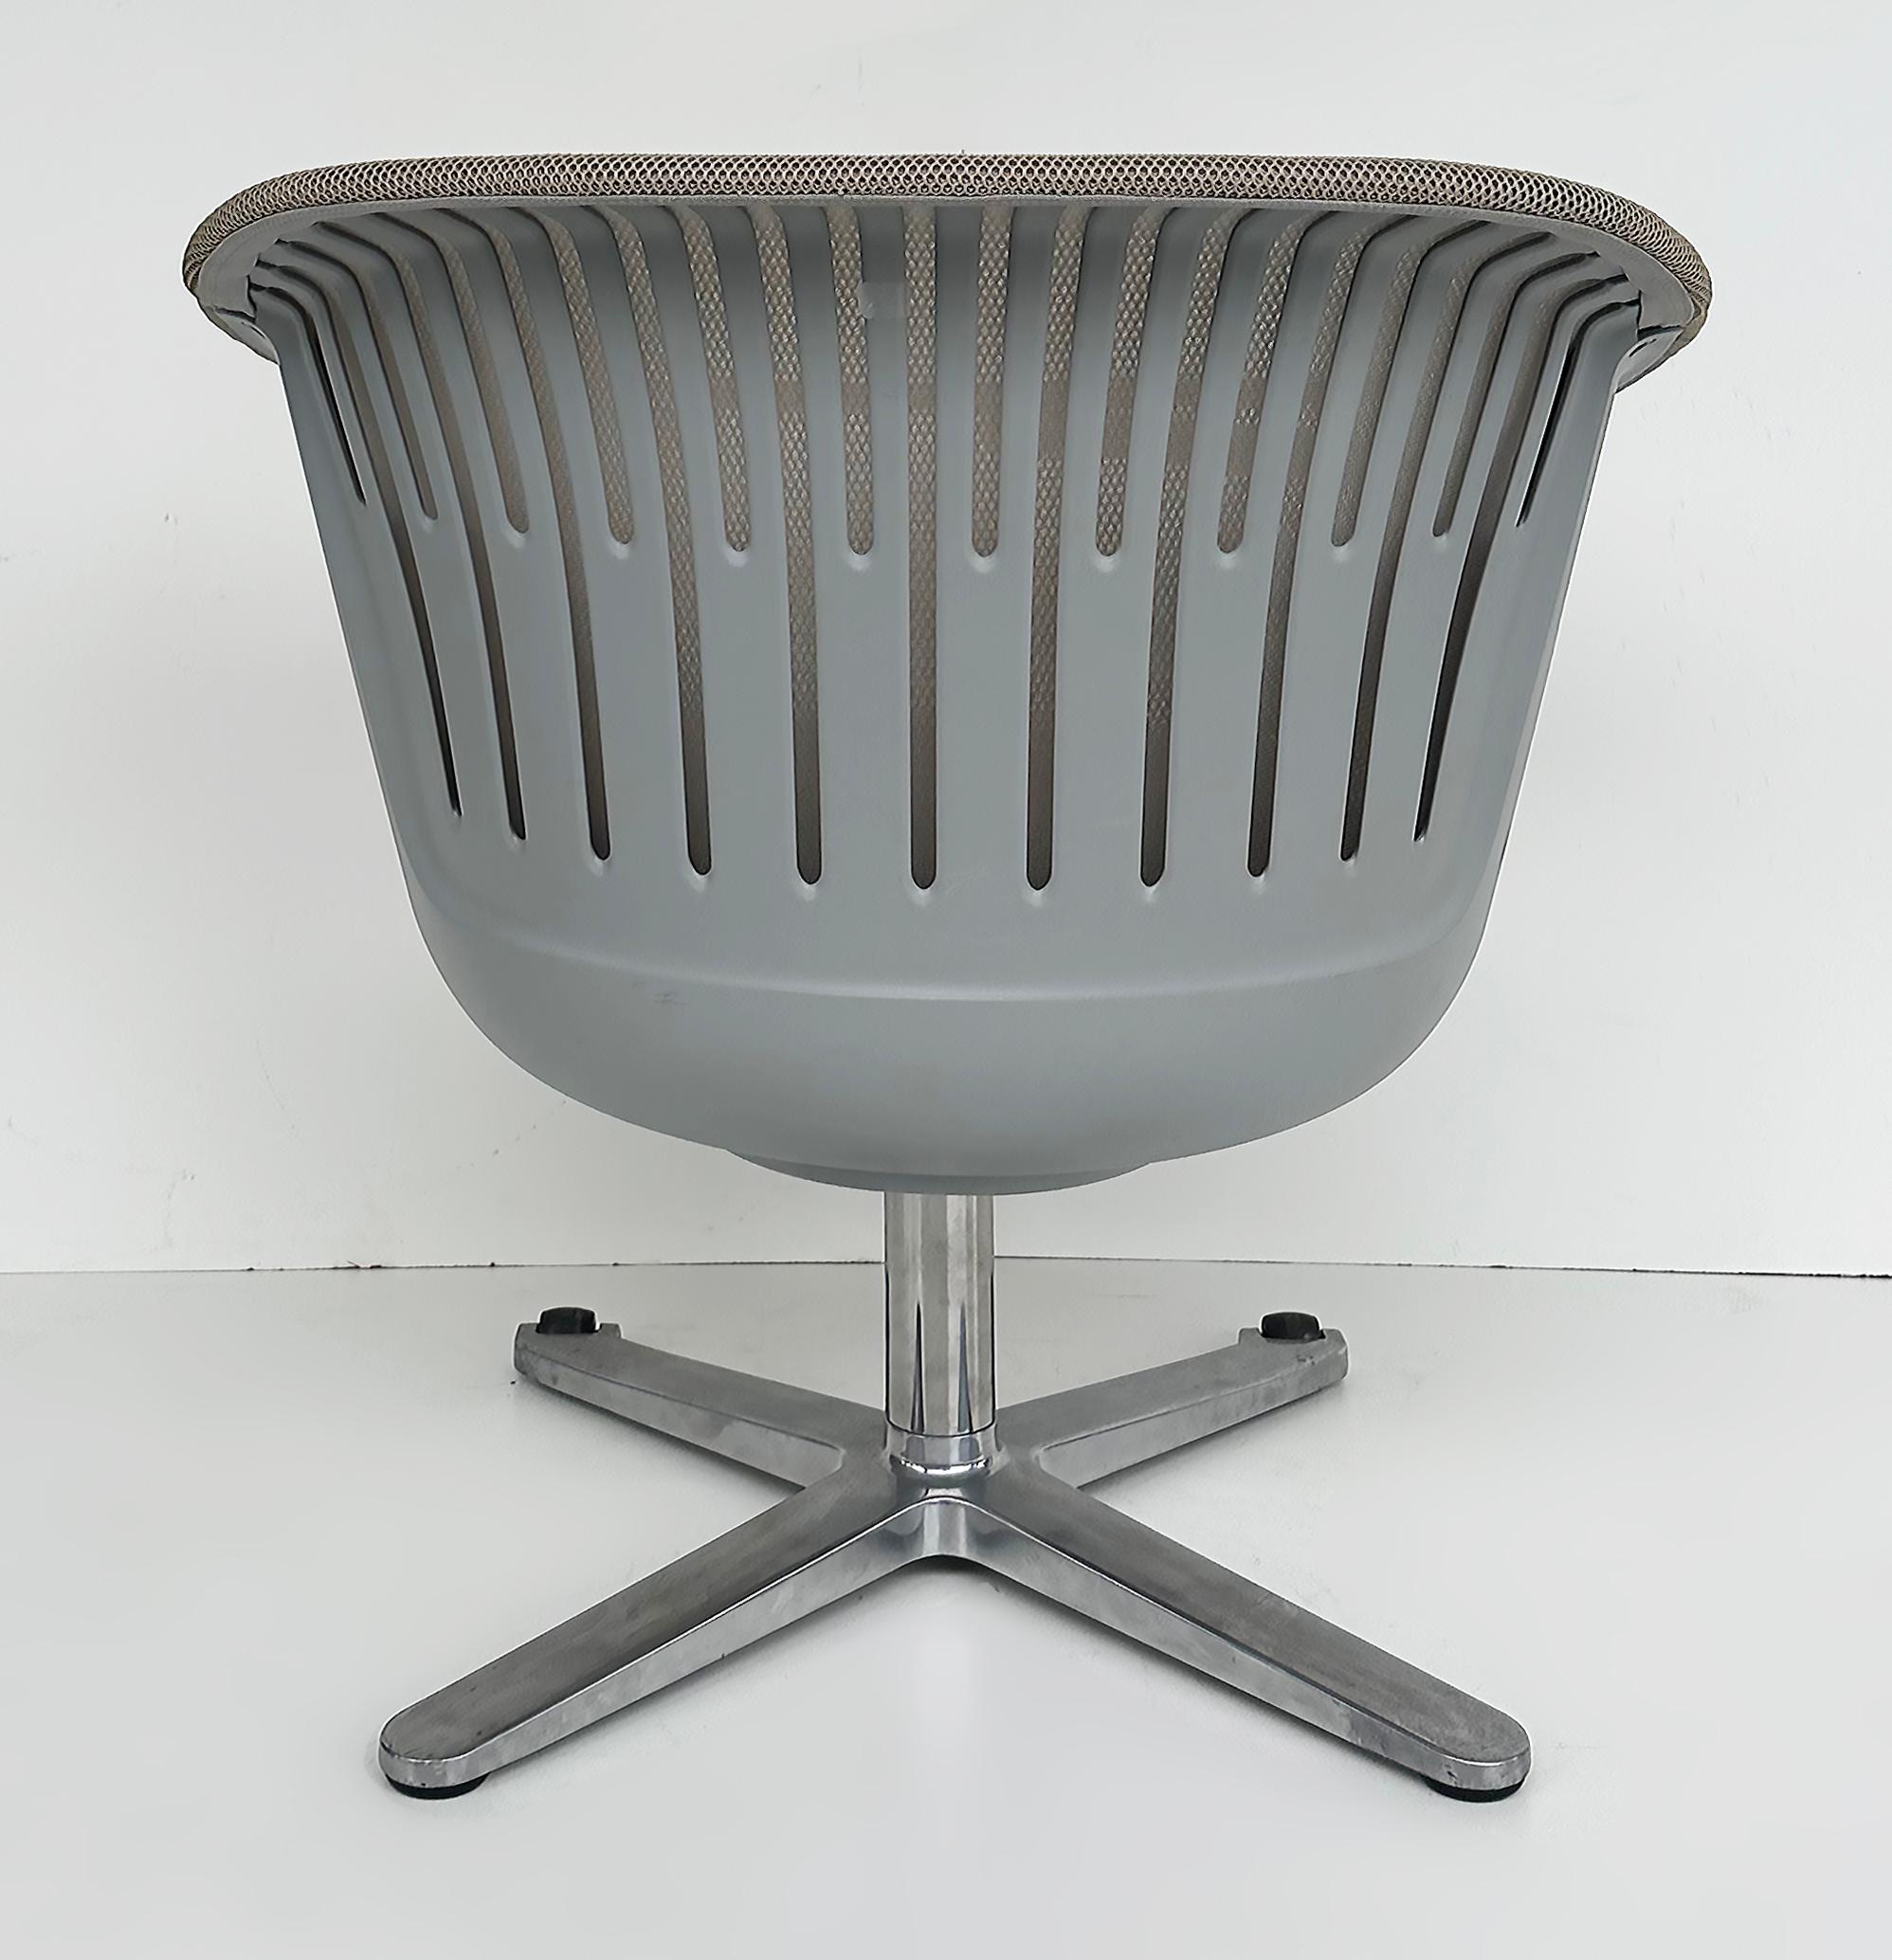 Steelcase i2i Ergonomic Dual Swivel Graphite Lounge Chair with Writing Tablet In Good Condition For Sale In Miami, FL